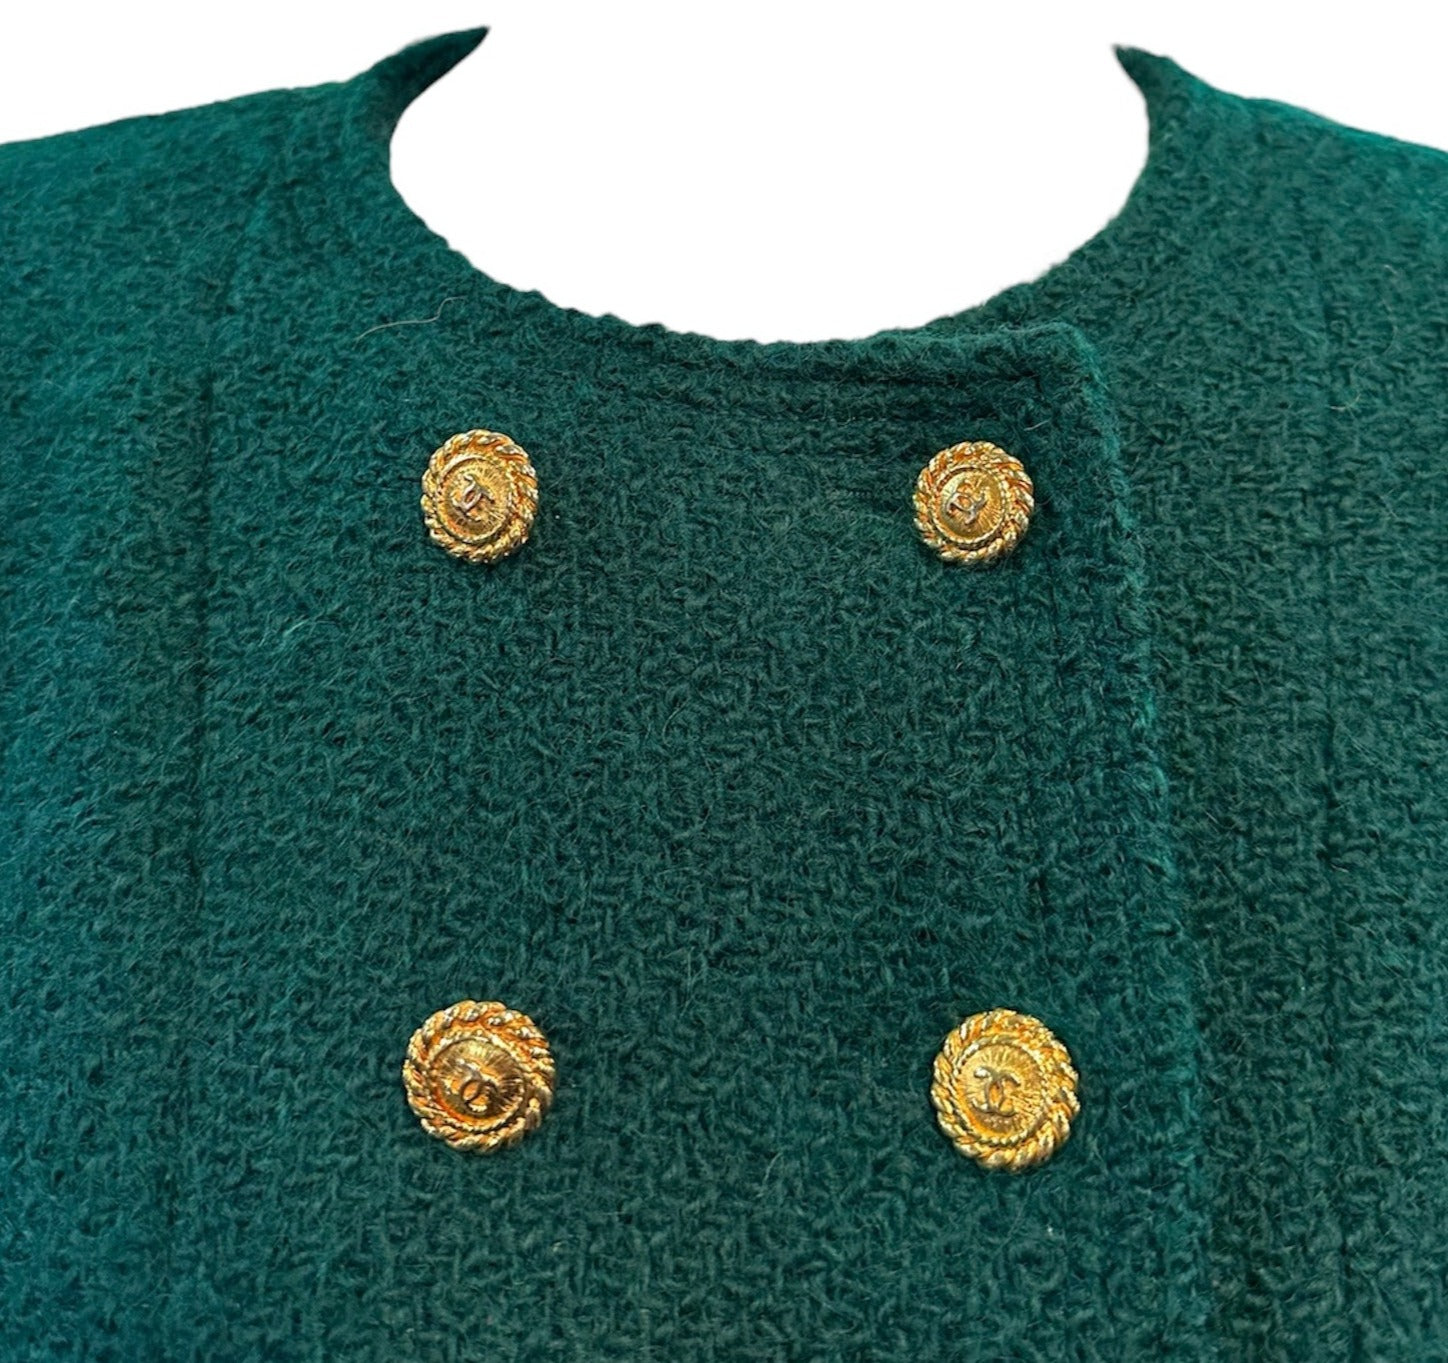   Chanel 90s Kelly Green  Double Breasted Nubby Wool Jacket with Logo Buttons COLLAR DETAIL 4 of 6